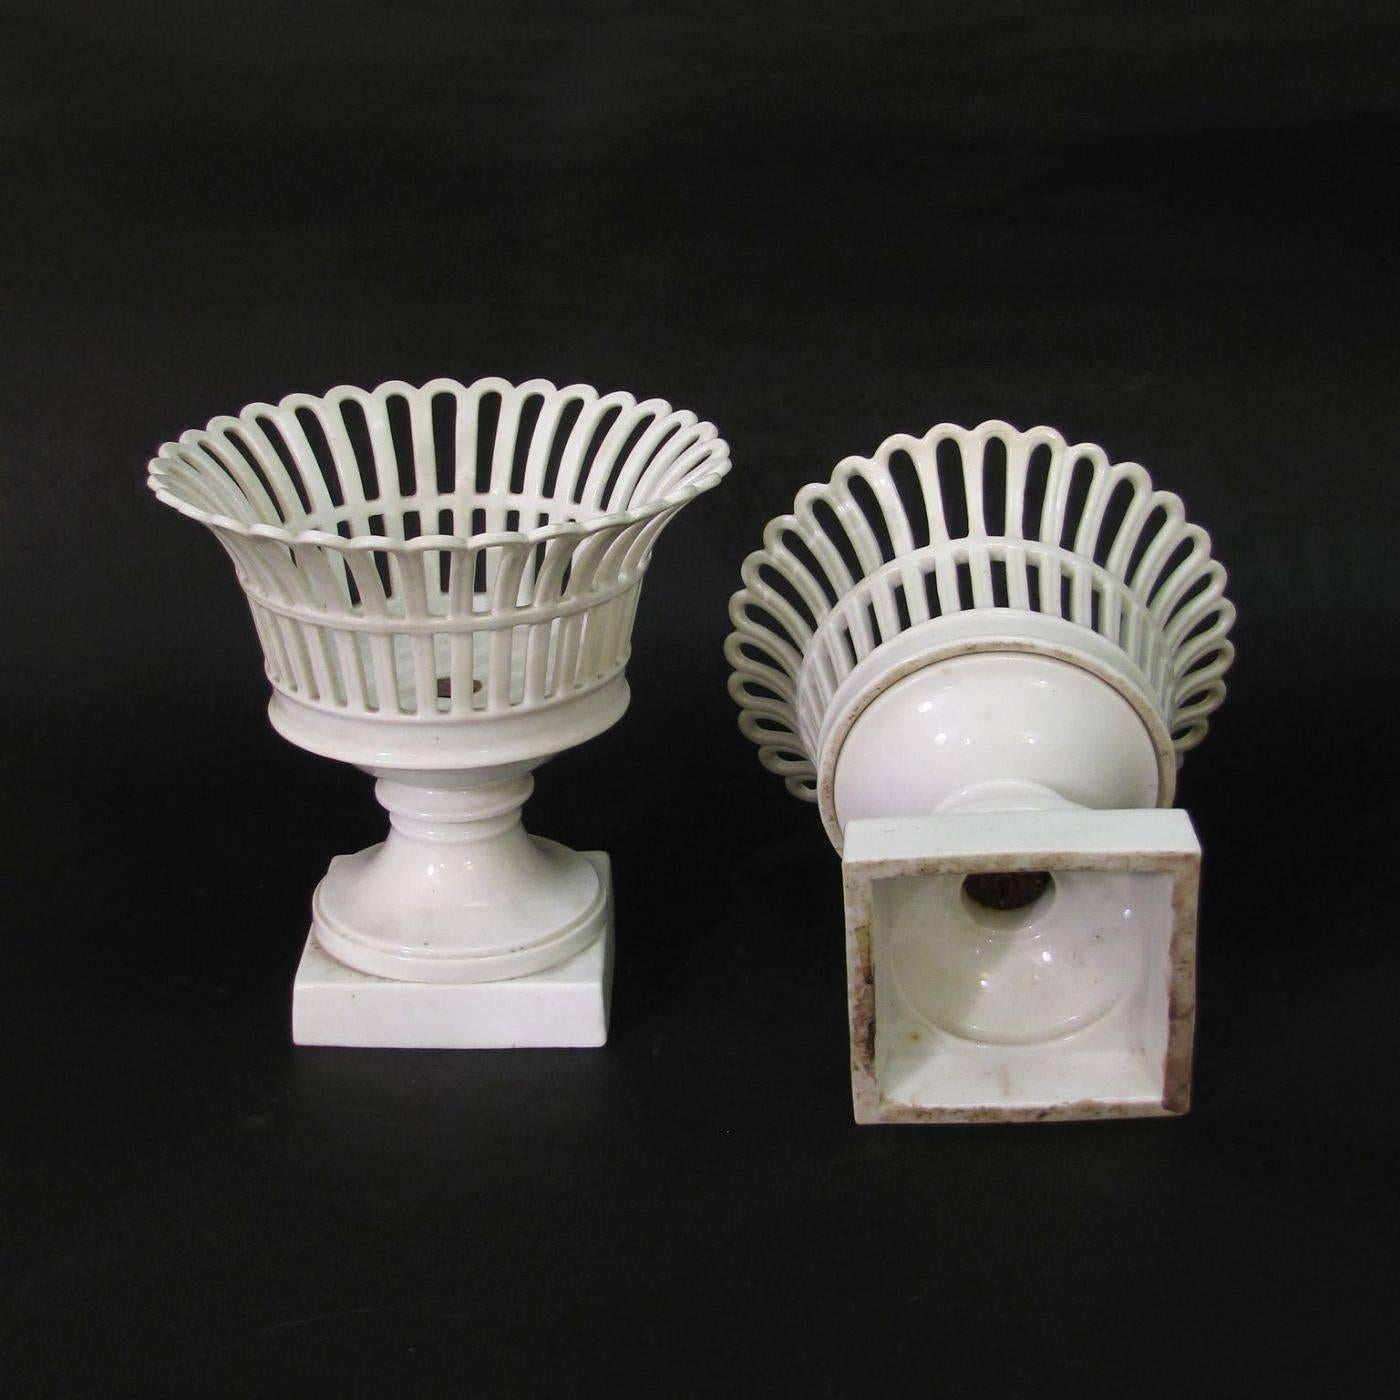 A beautiful pair of fruit baskets in white porcelain.
The square base is surmounted by an elegant perforated bowl or basket.
Italy, late 19th century.

    